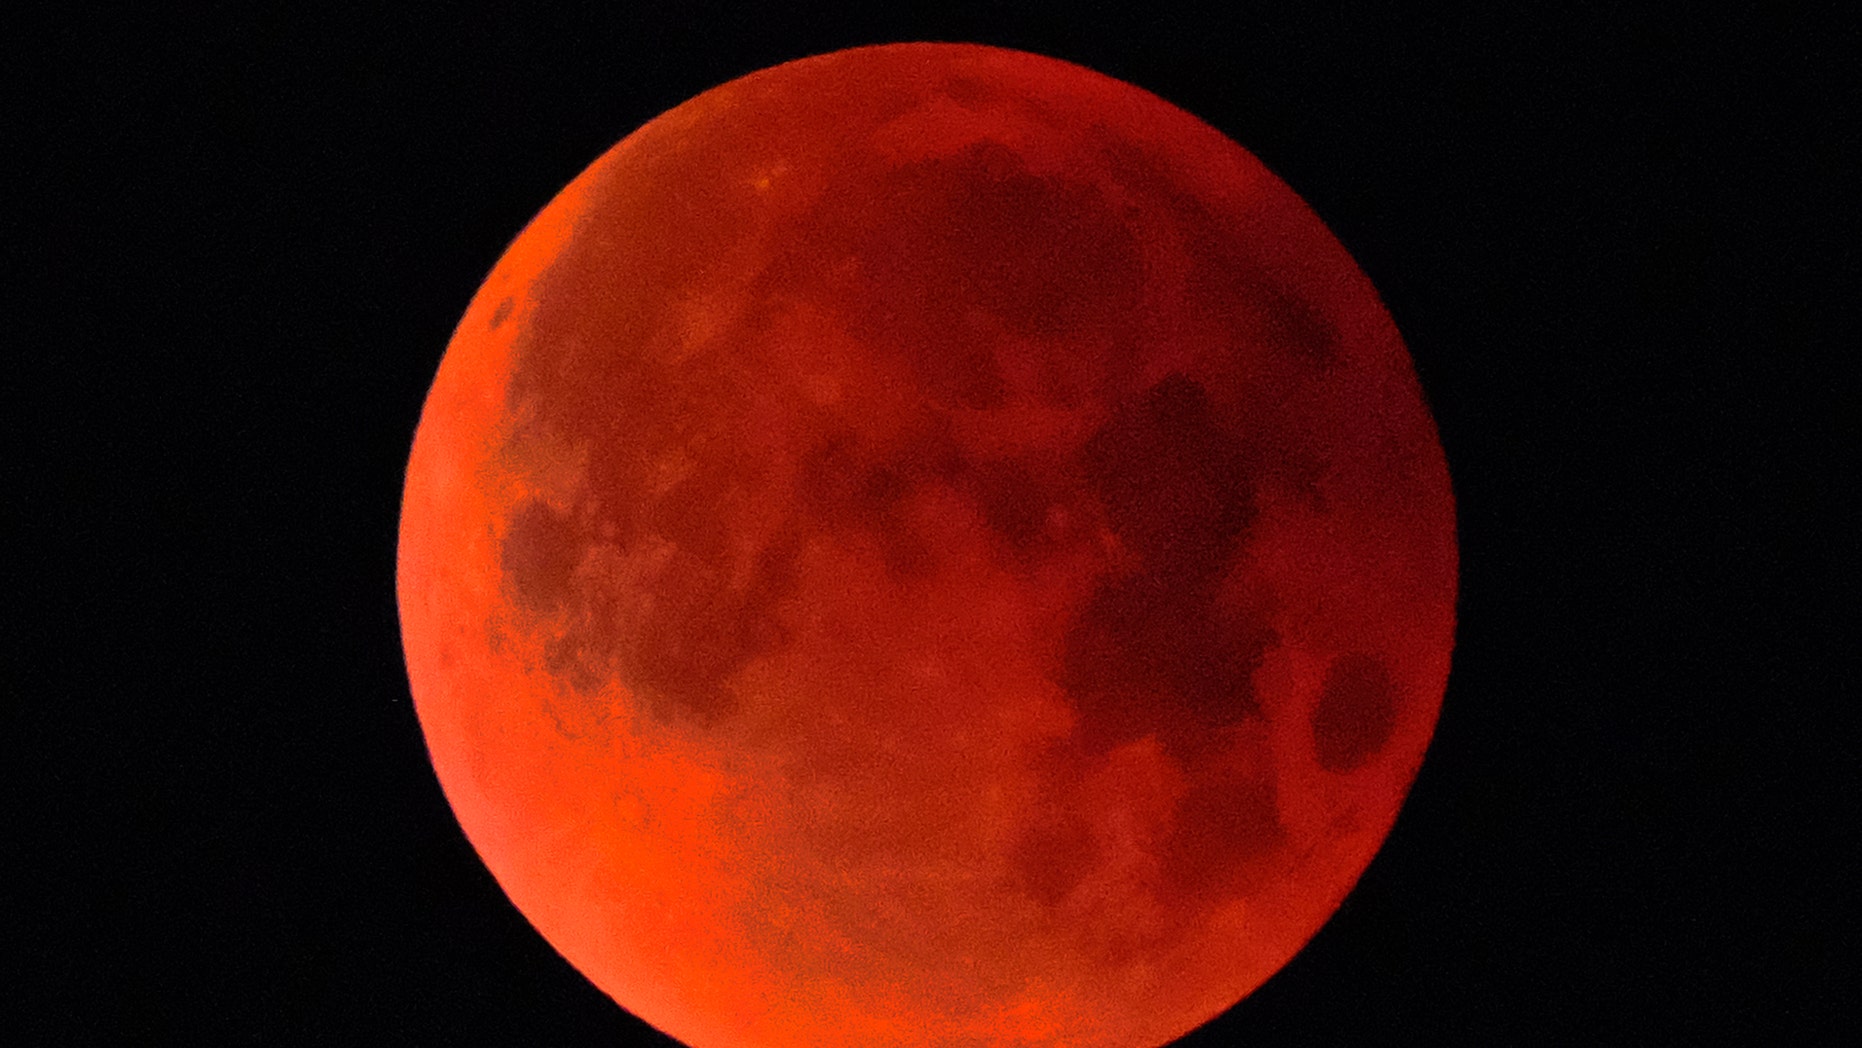 Earth will experience a rare 'super blood moon' eclipse on Jan. 20 and Jan. 21.